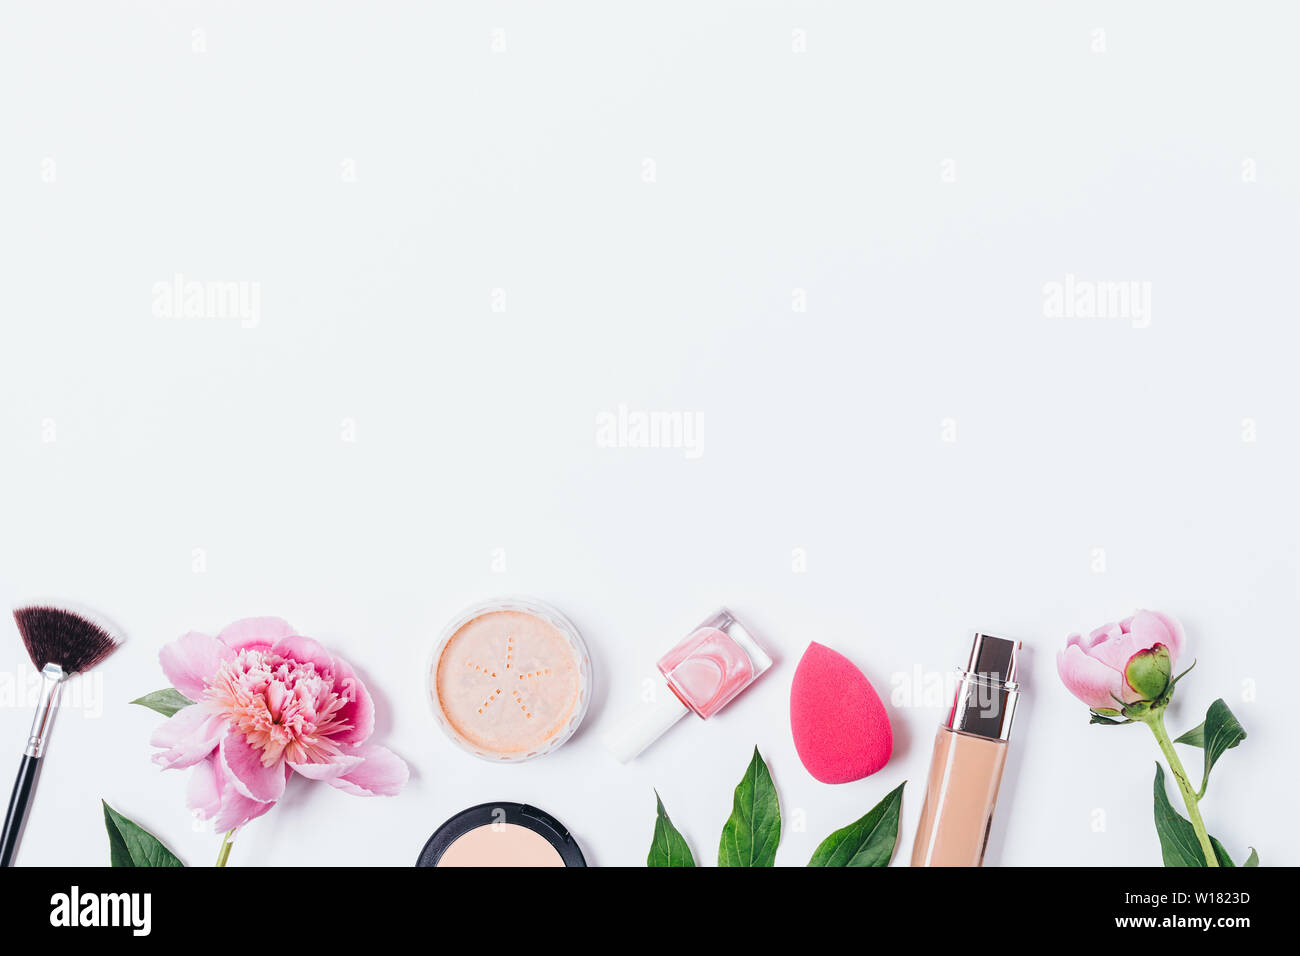 Top view row of makeup products, face powder, foundation, sponge beauty blender, cosmetic brushes and fresh pink peony flowers on white background wit Stock Photo